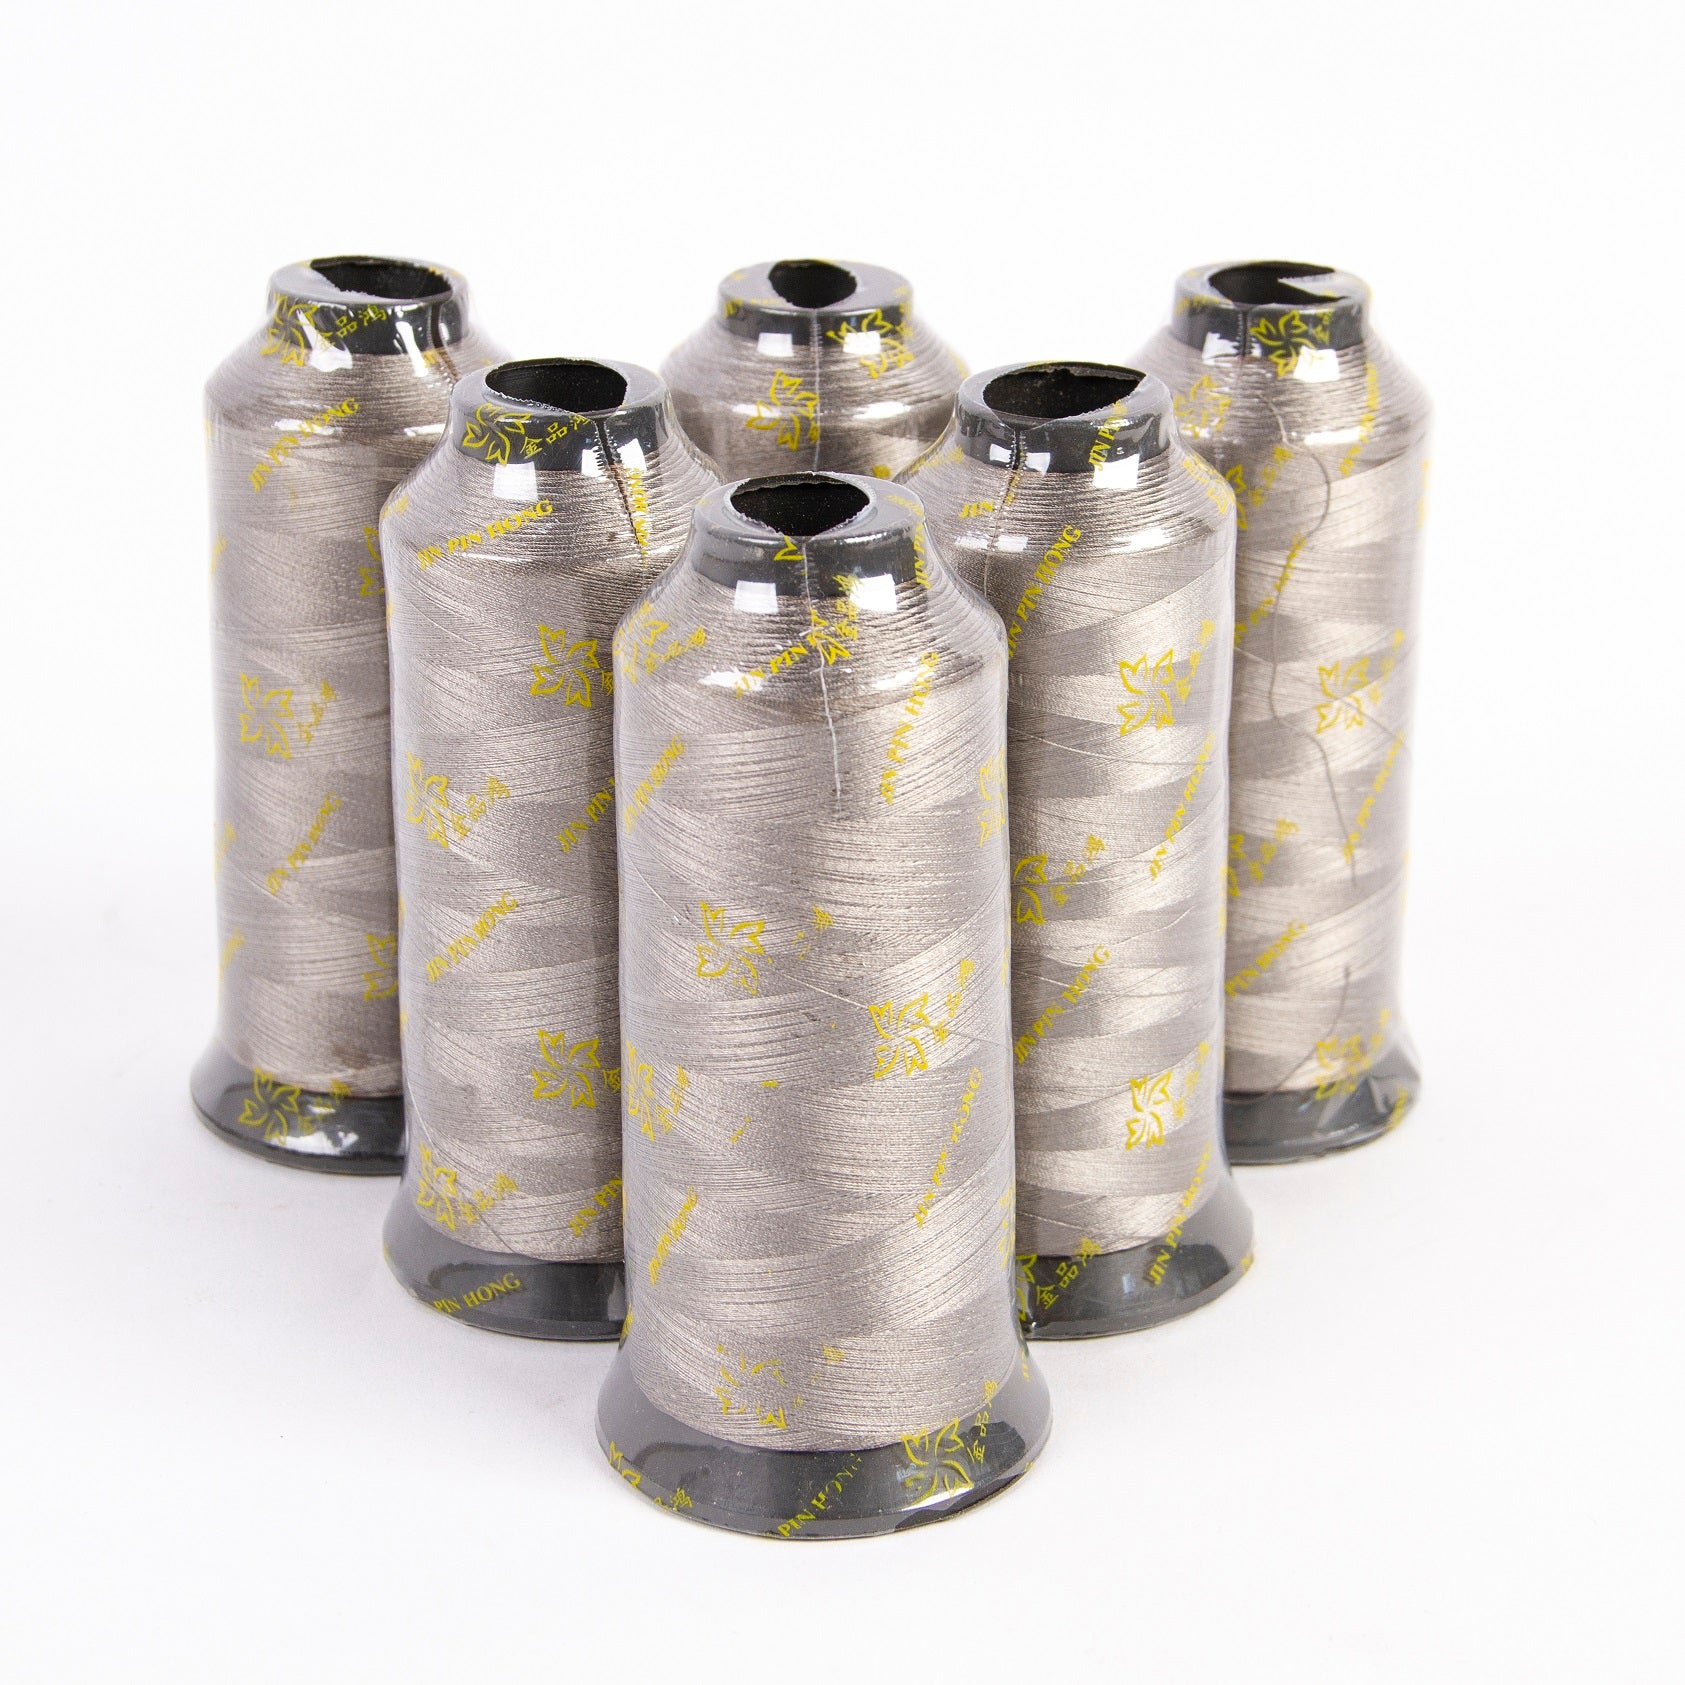 Metallized Sewing and Embroidery thread made from 100% silver fiber 